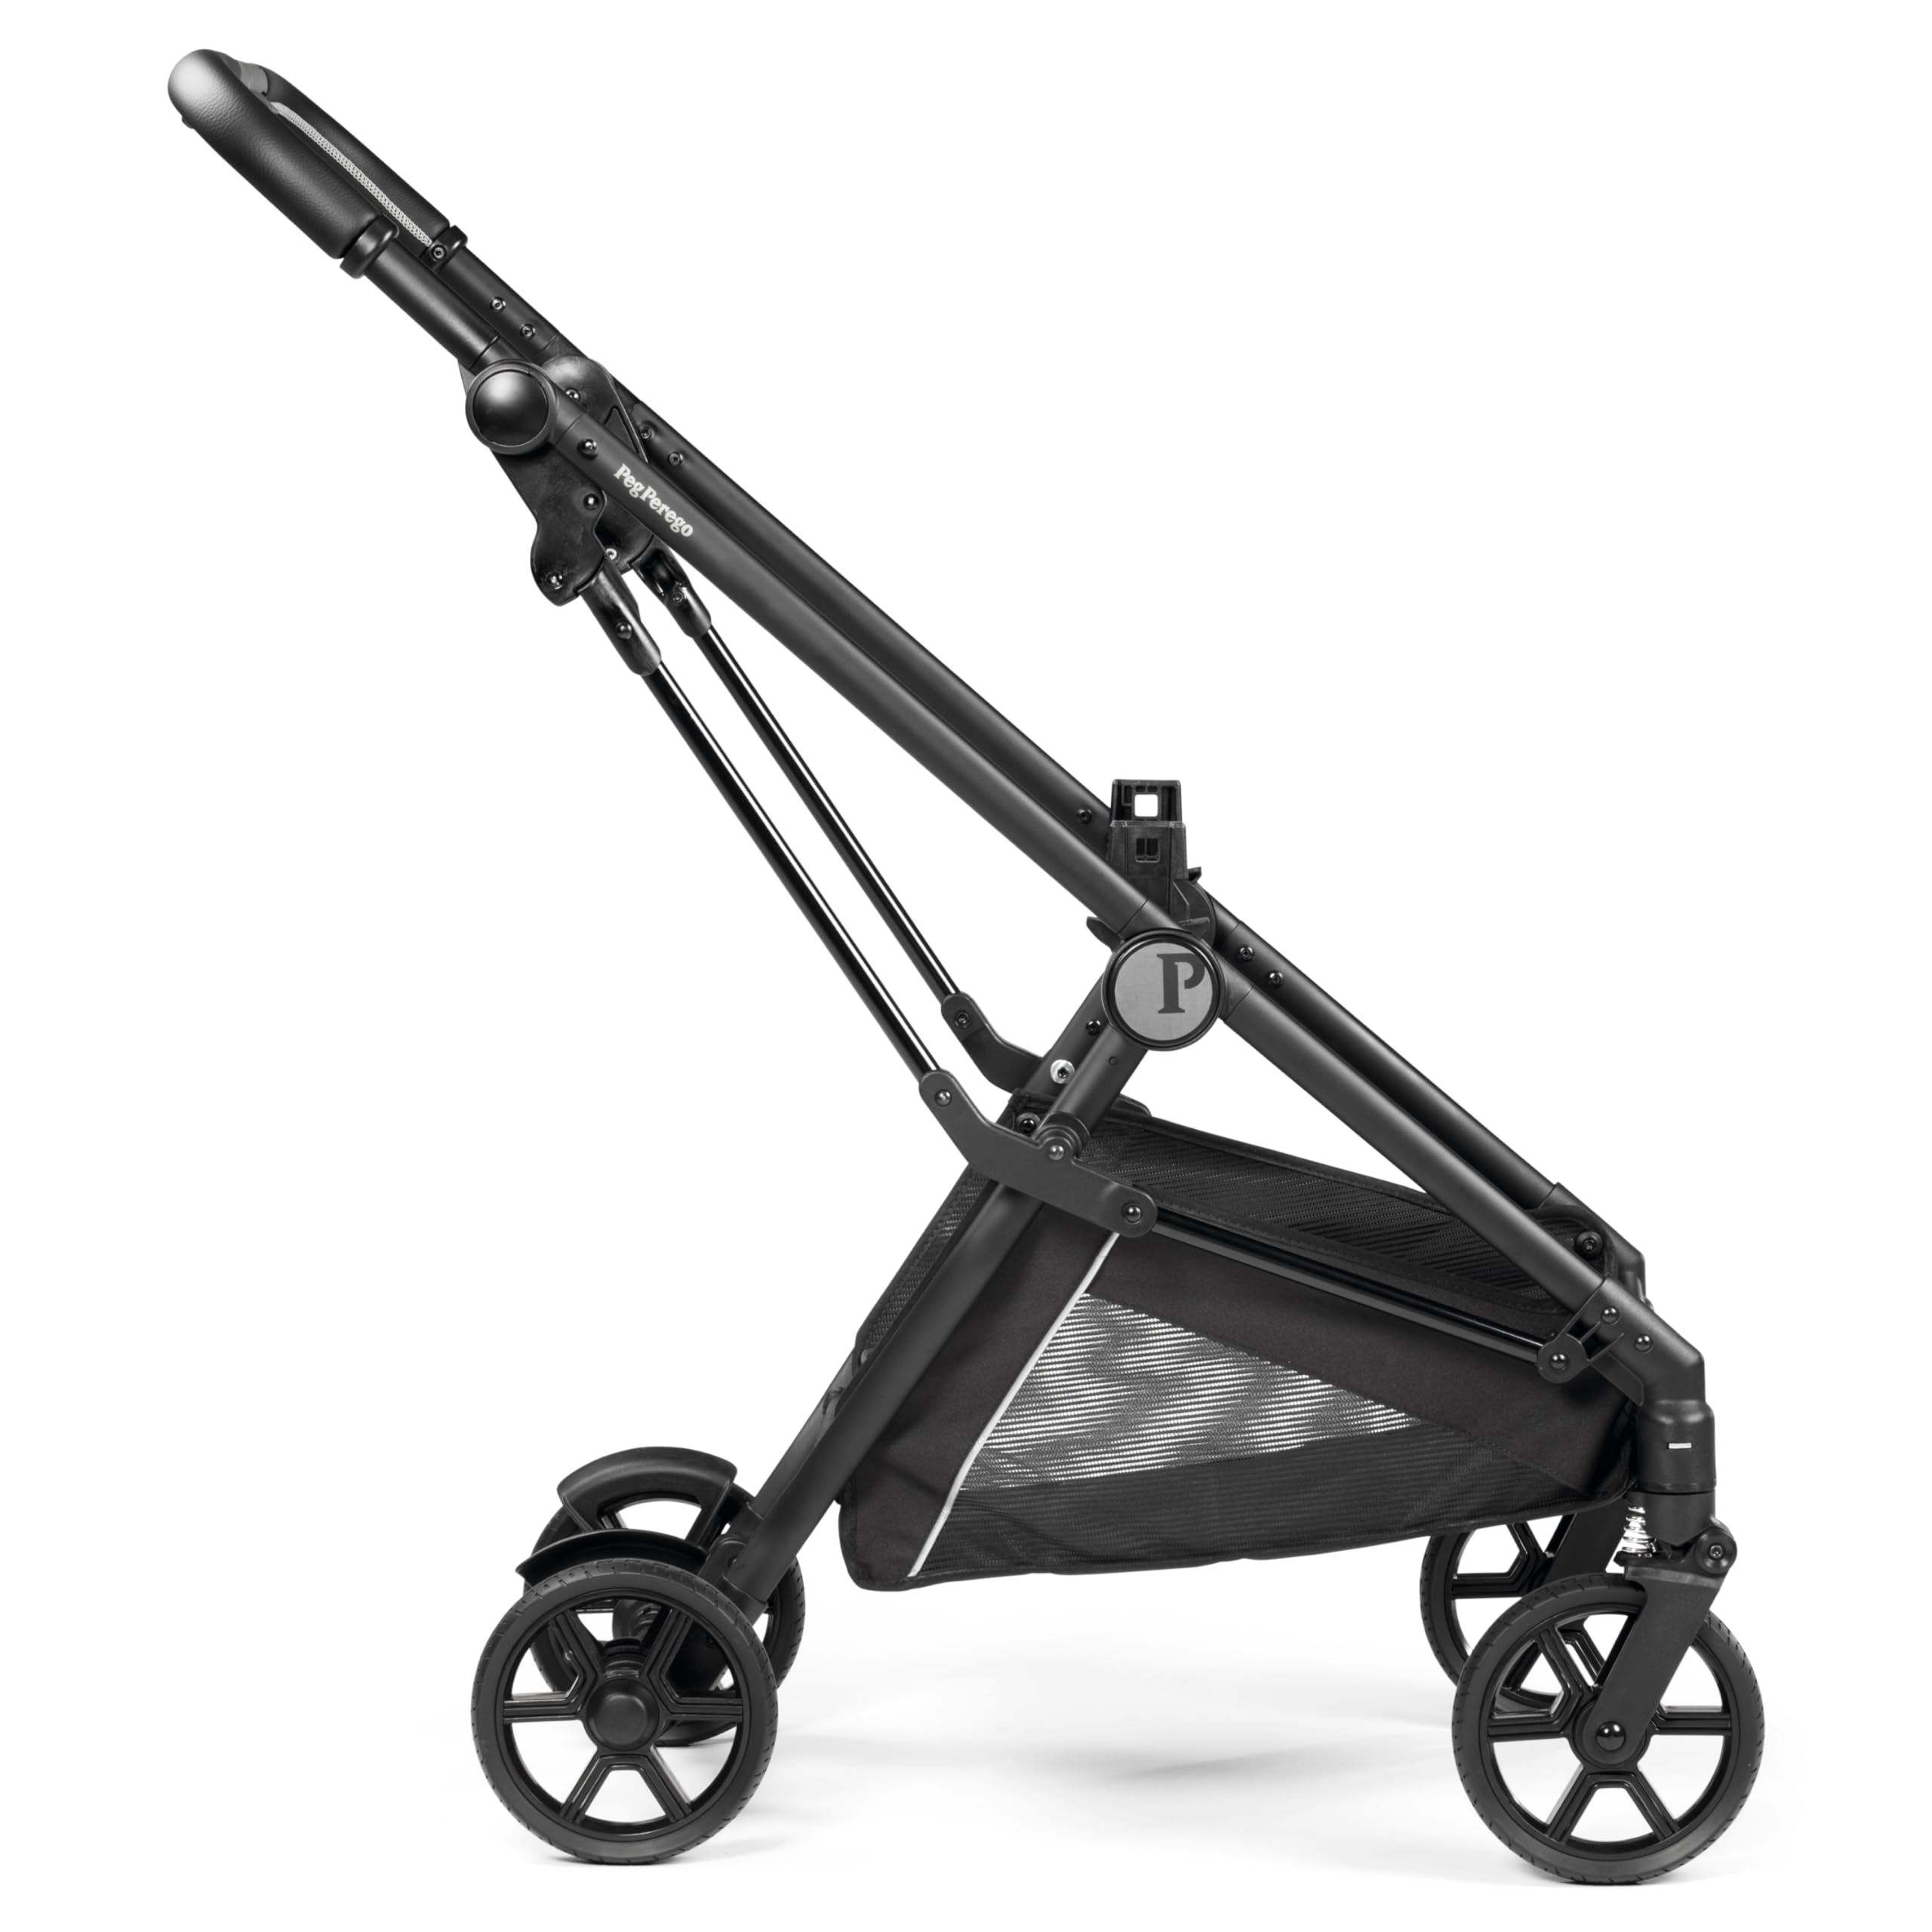 Peg Perego Primo Viaggio 4-35 Lounge on Wheels - Includes Vivace Chassis and Primo Viaggio 4-35 Lounge Reclining Infant Car Seat - Made in Italy - True Black